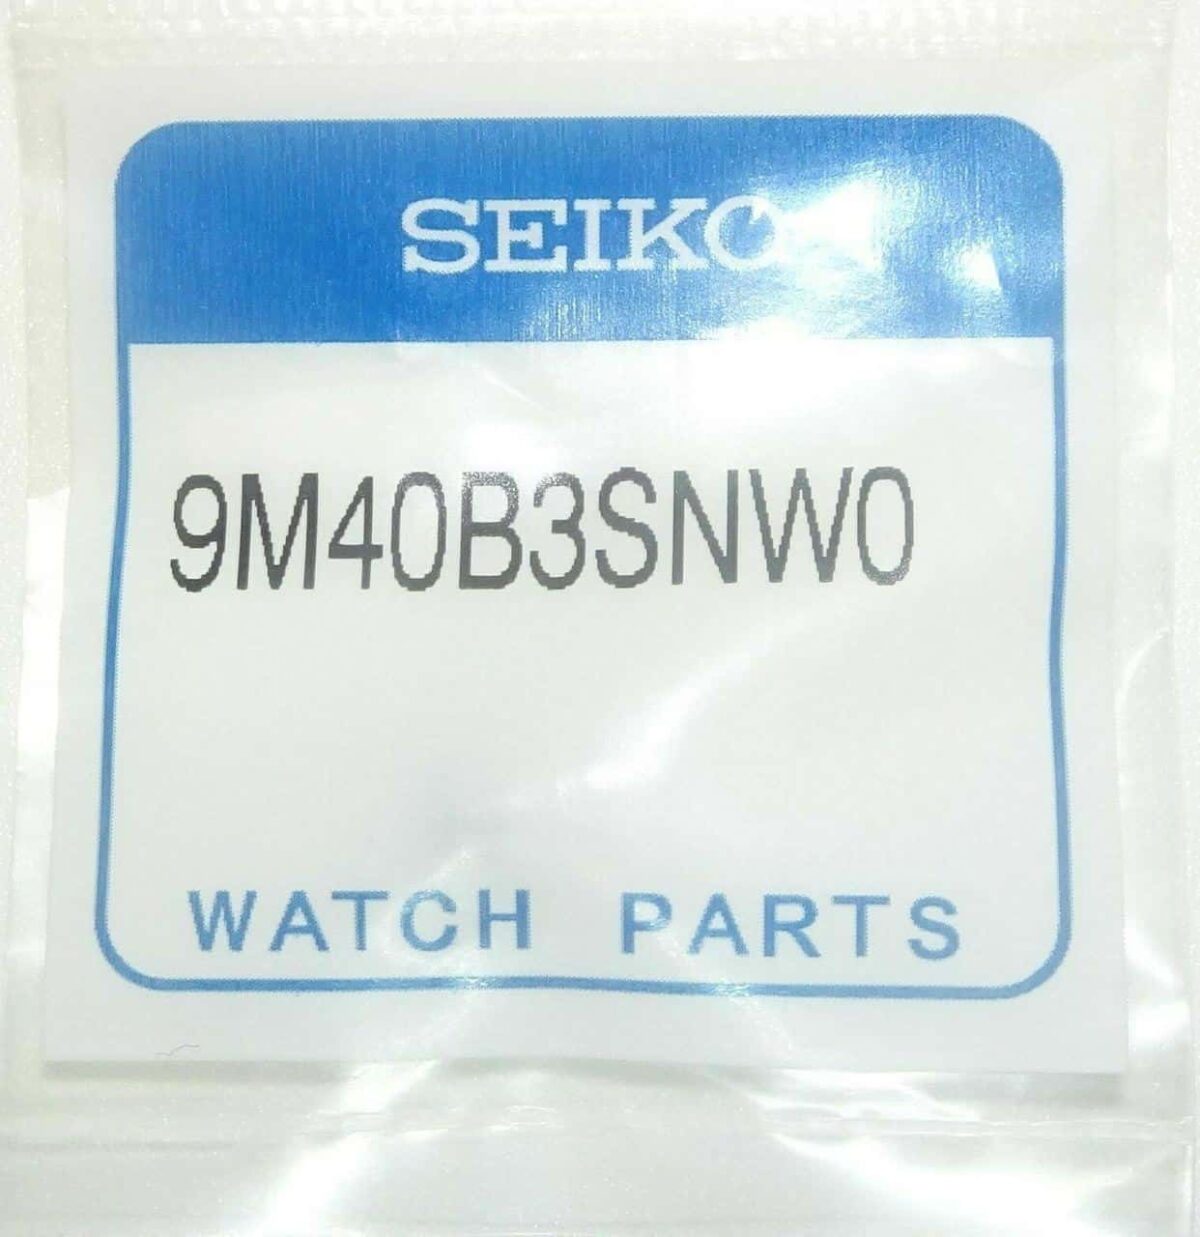 GENUINE REPLACEMENT CROWN FOR SEIKO 7S26 02J0 Part No 9M40B3SNW0 ORIGINAL 192804511890 2